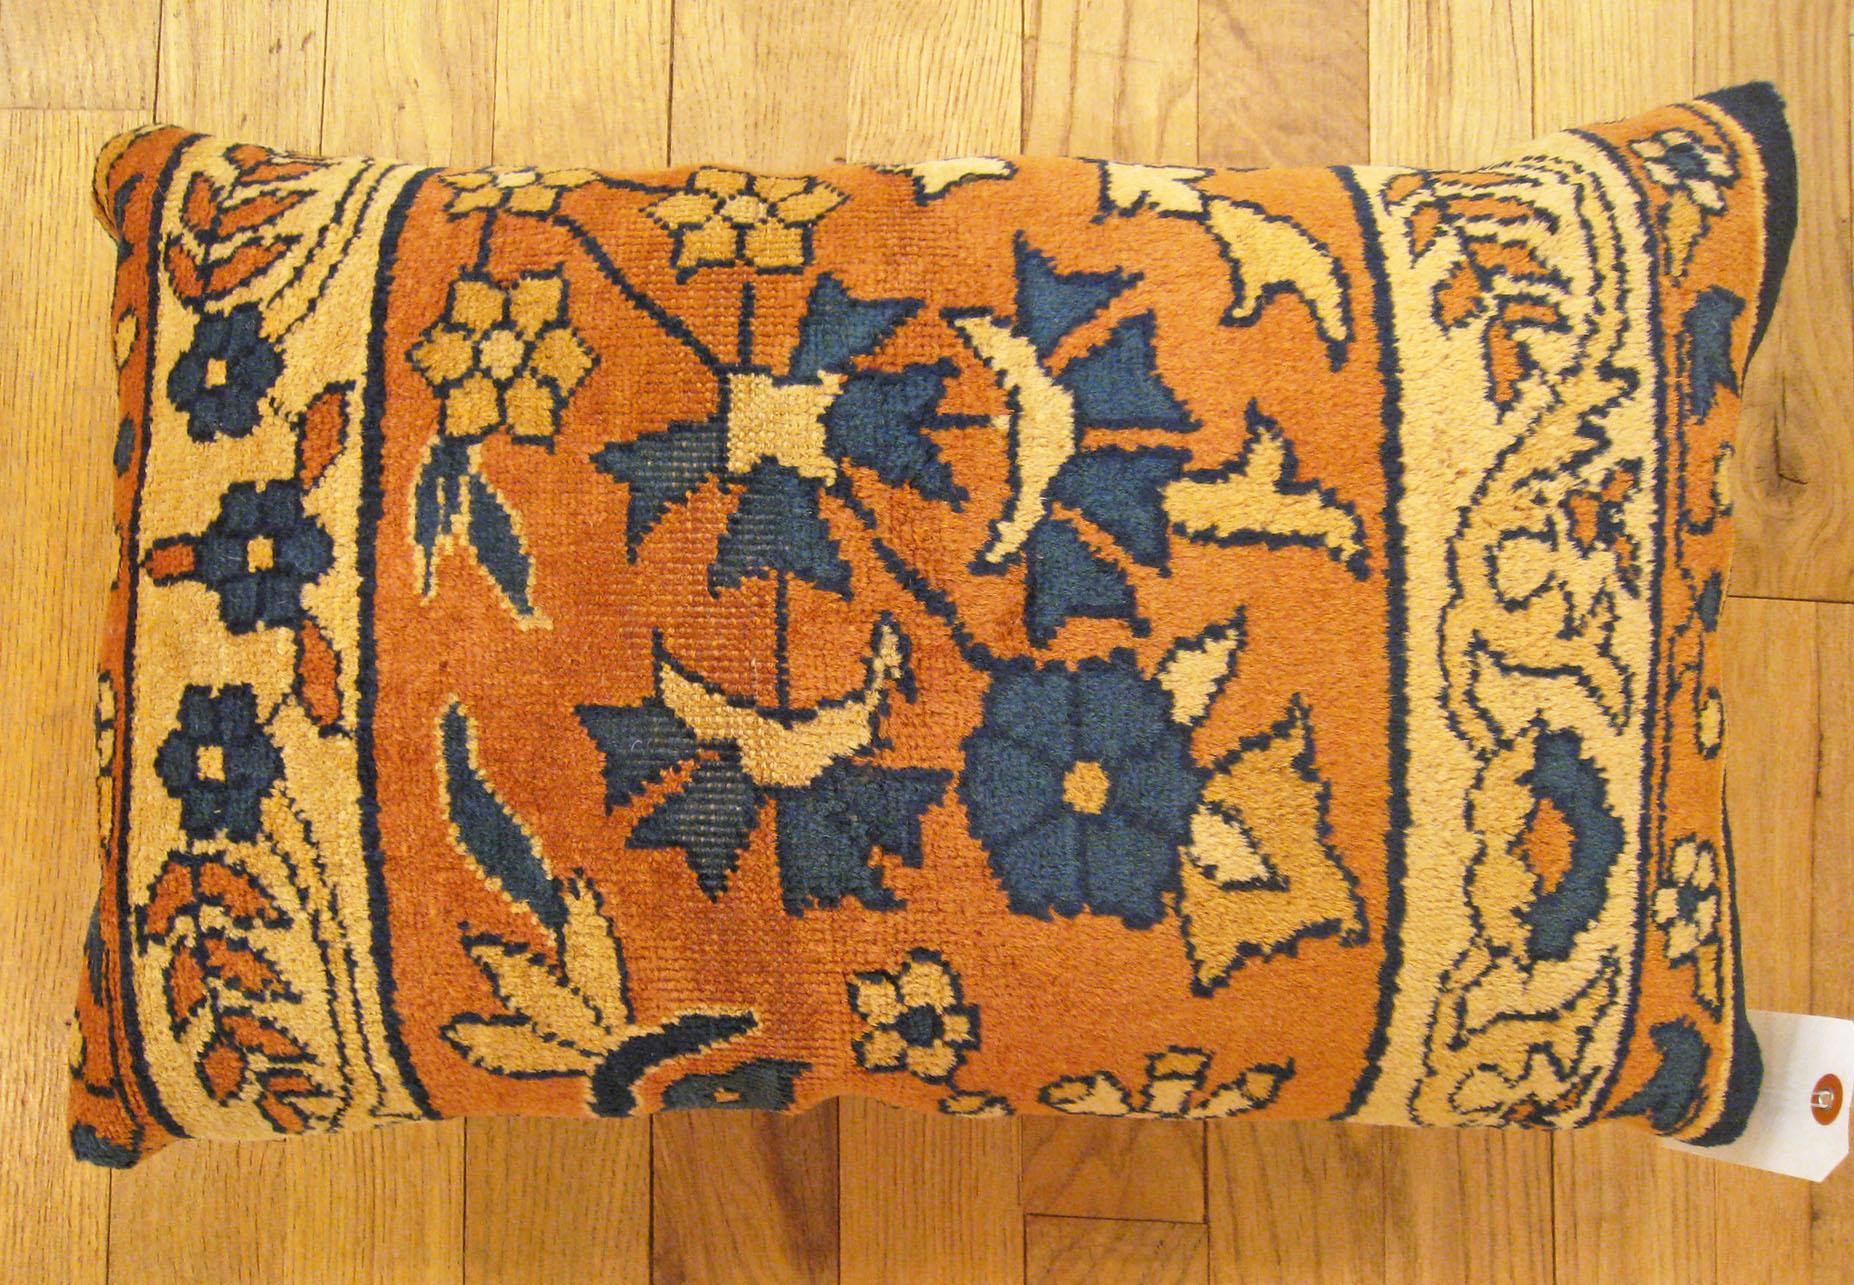 Antique Indian Agra rug pillow; size 1'8” x 1'1”.

An antique decorative pillow with floral elements allover a salmon central field, size 1'8” x 1'1”. This lovely decorative pillow features an antique fabric of a Agra rug on front which is